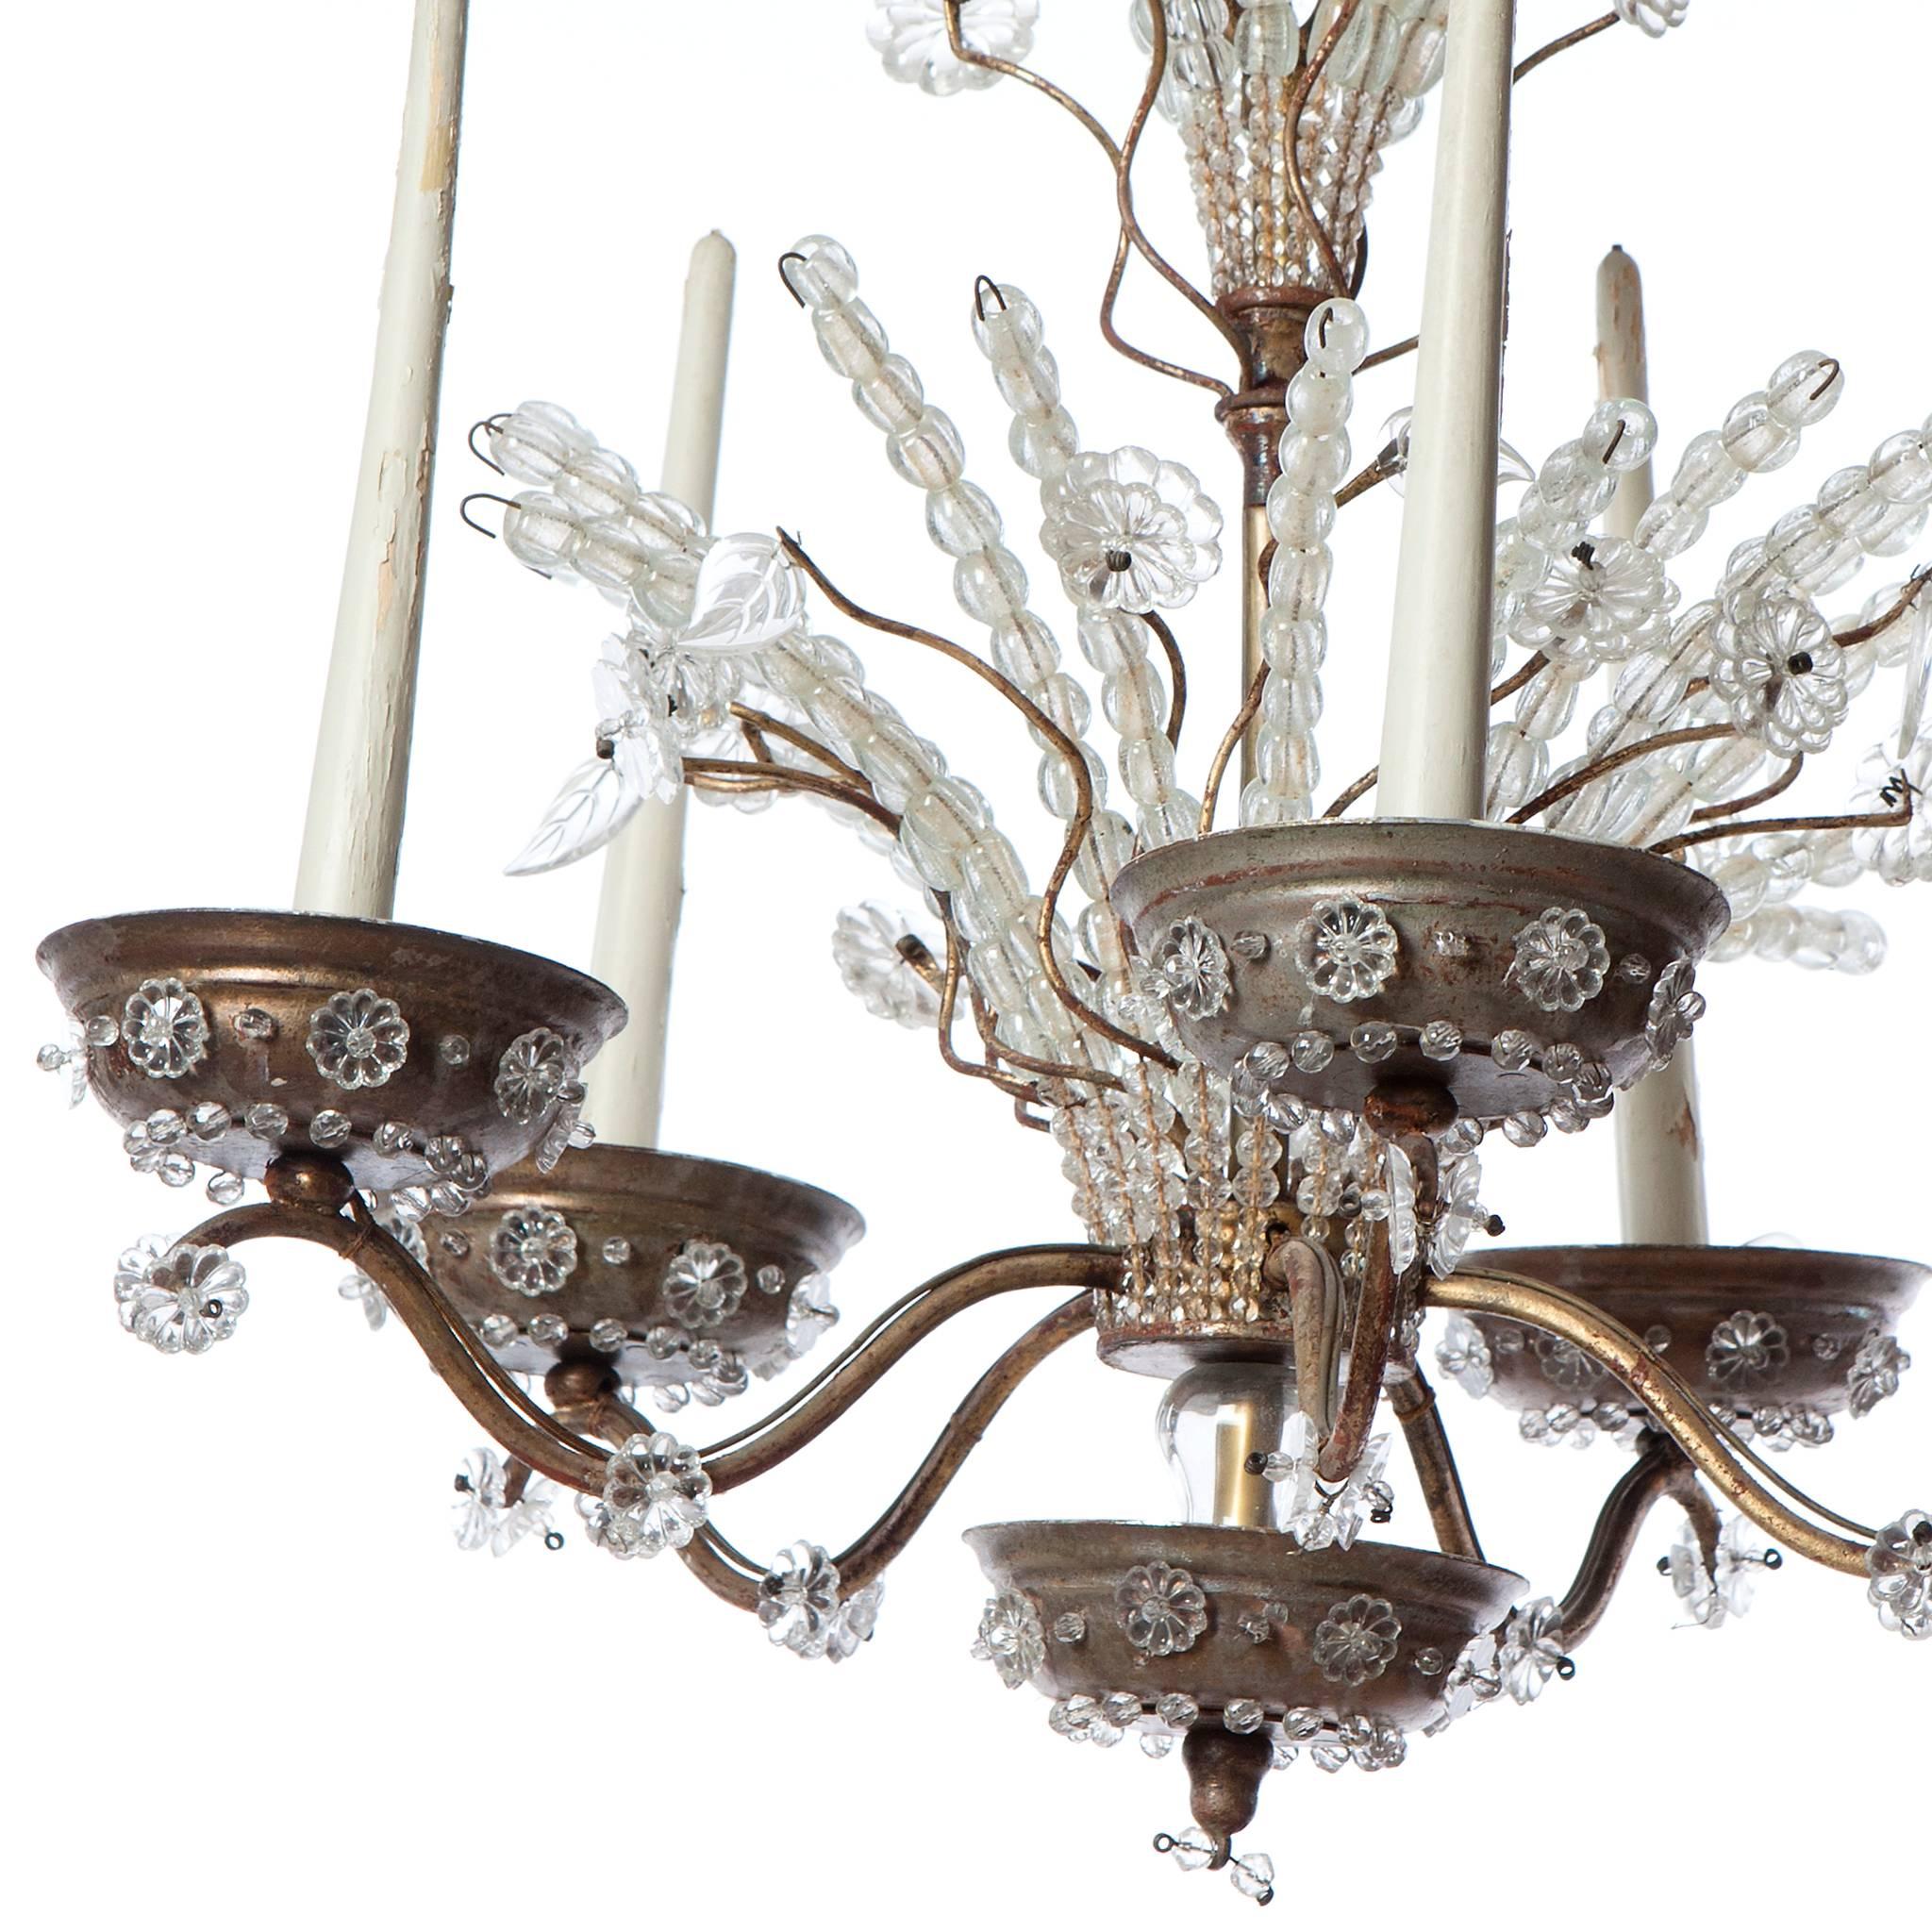 Stunning silver-plated brass and mountain crystal chandelier from 1920s. It holds 10 lightbulbs.  Attributed to Maison Baguès.